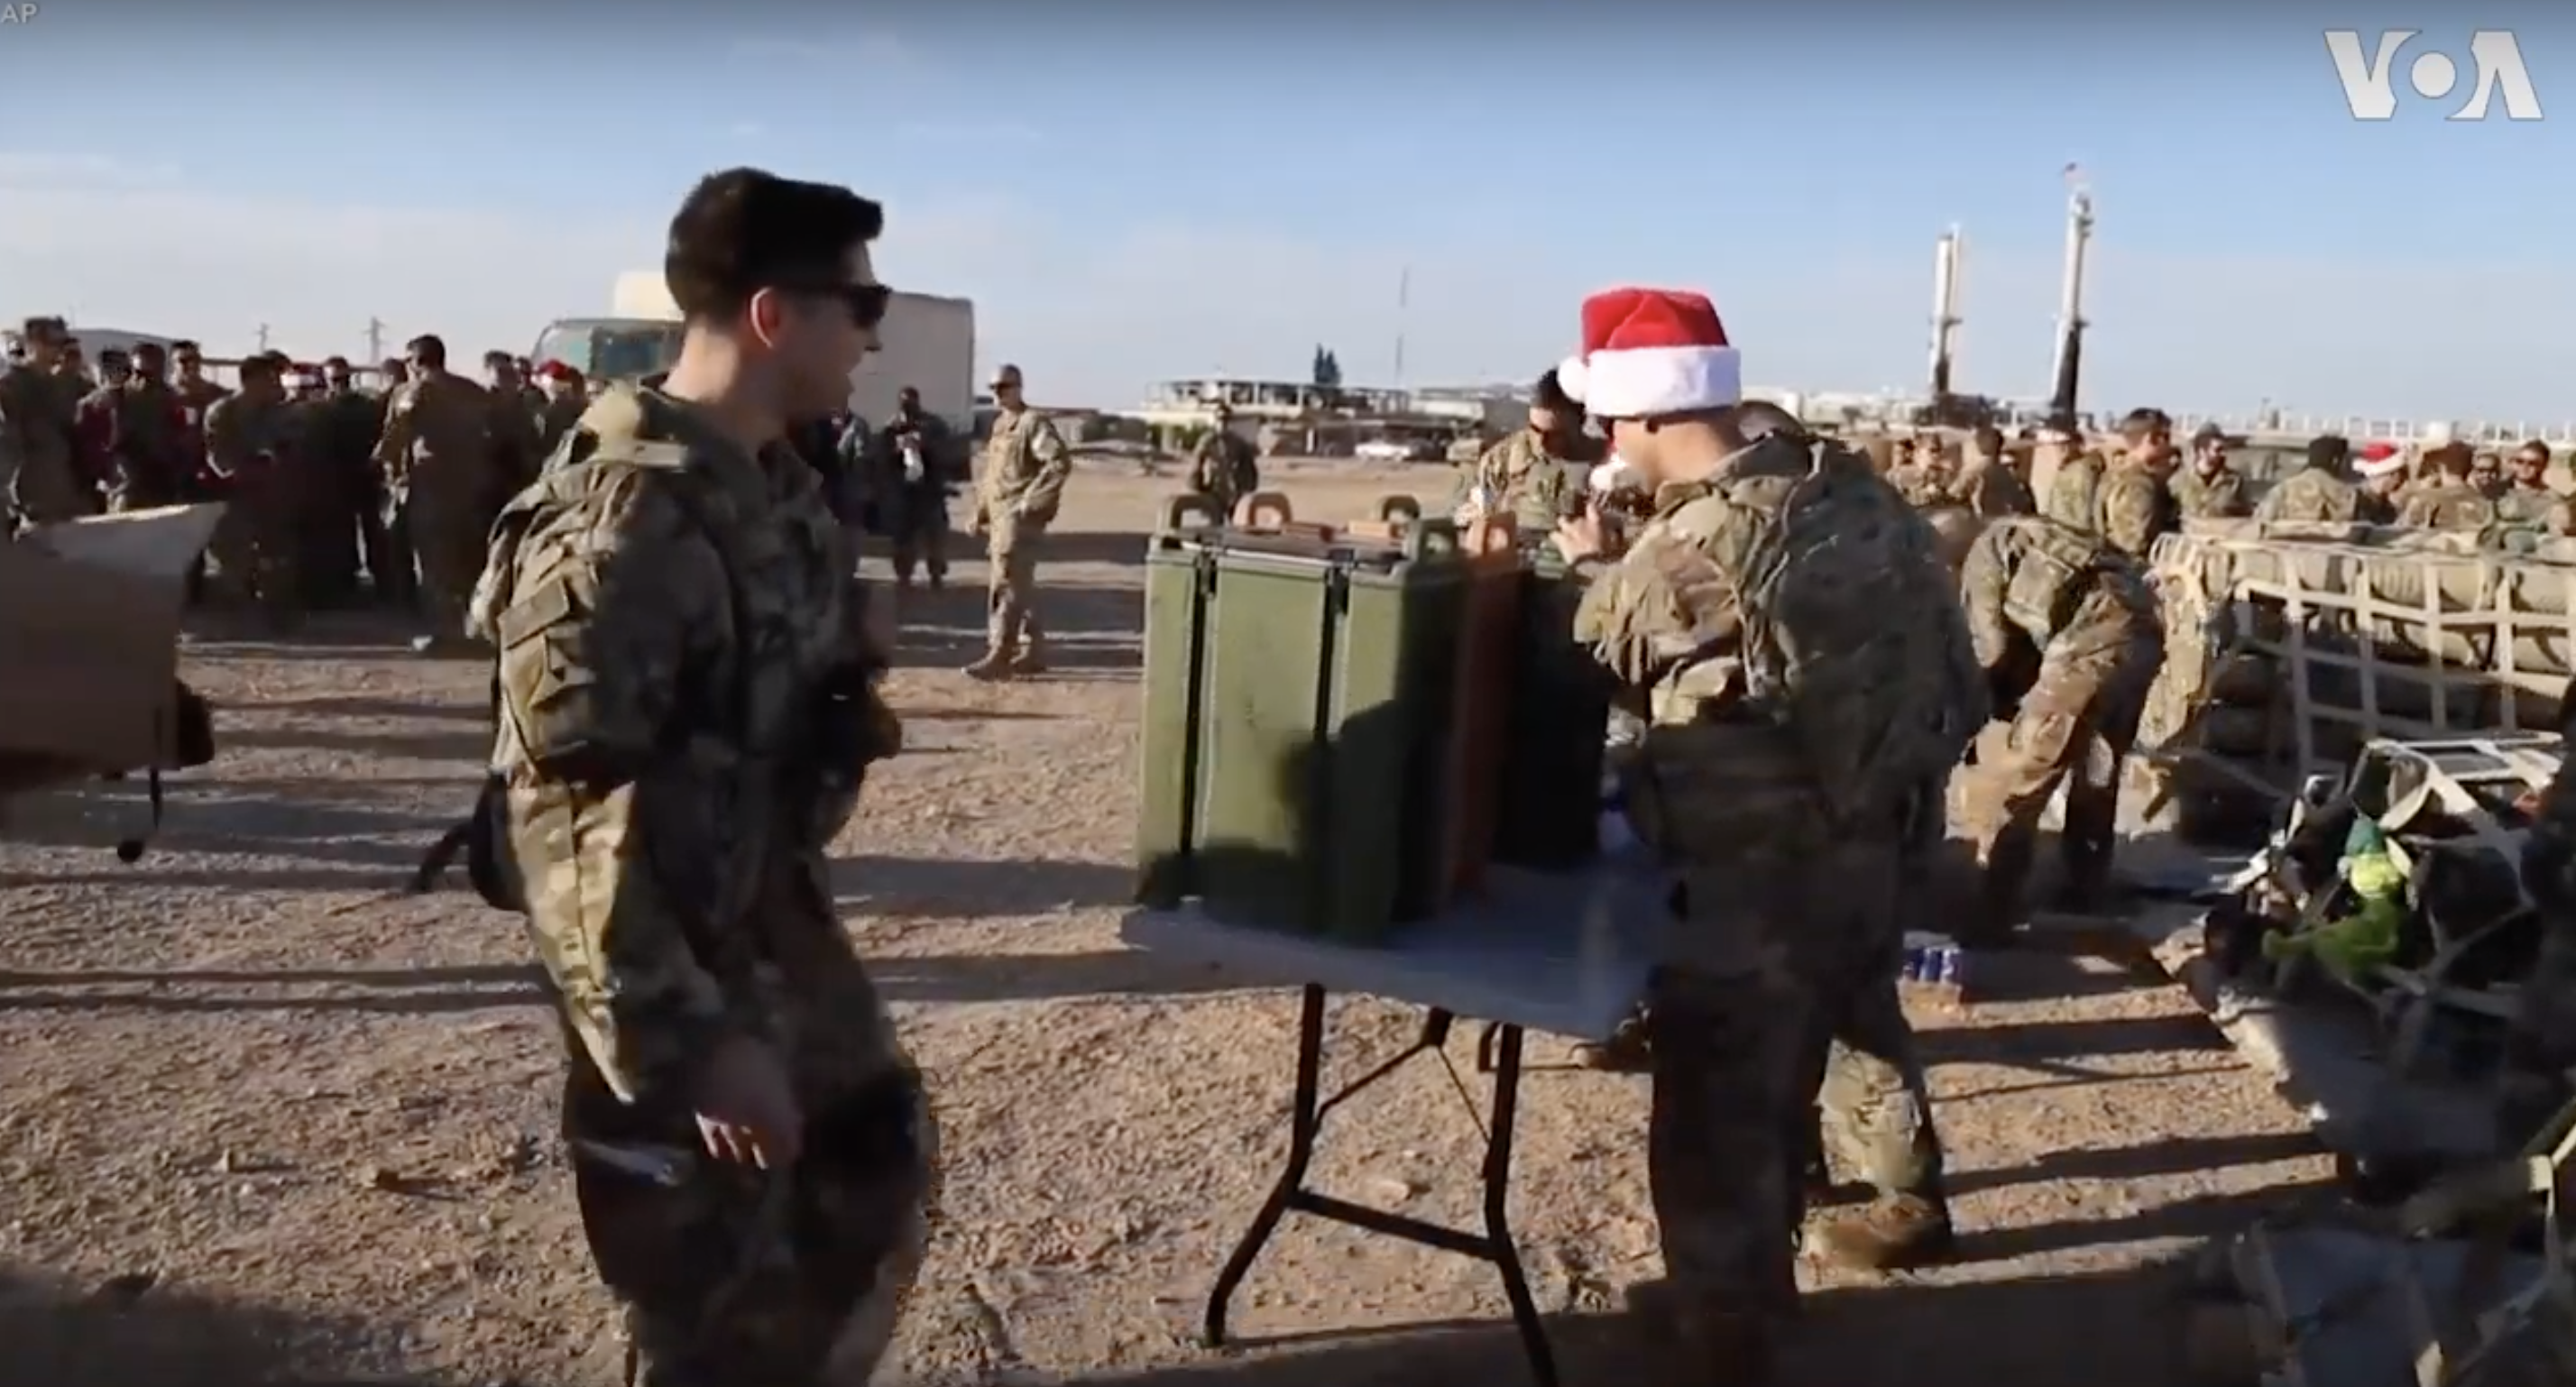 Christmas presents were delivered to American troops serving in Syria. (YouTube/Screenshot/Public — User: VOA)